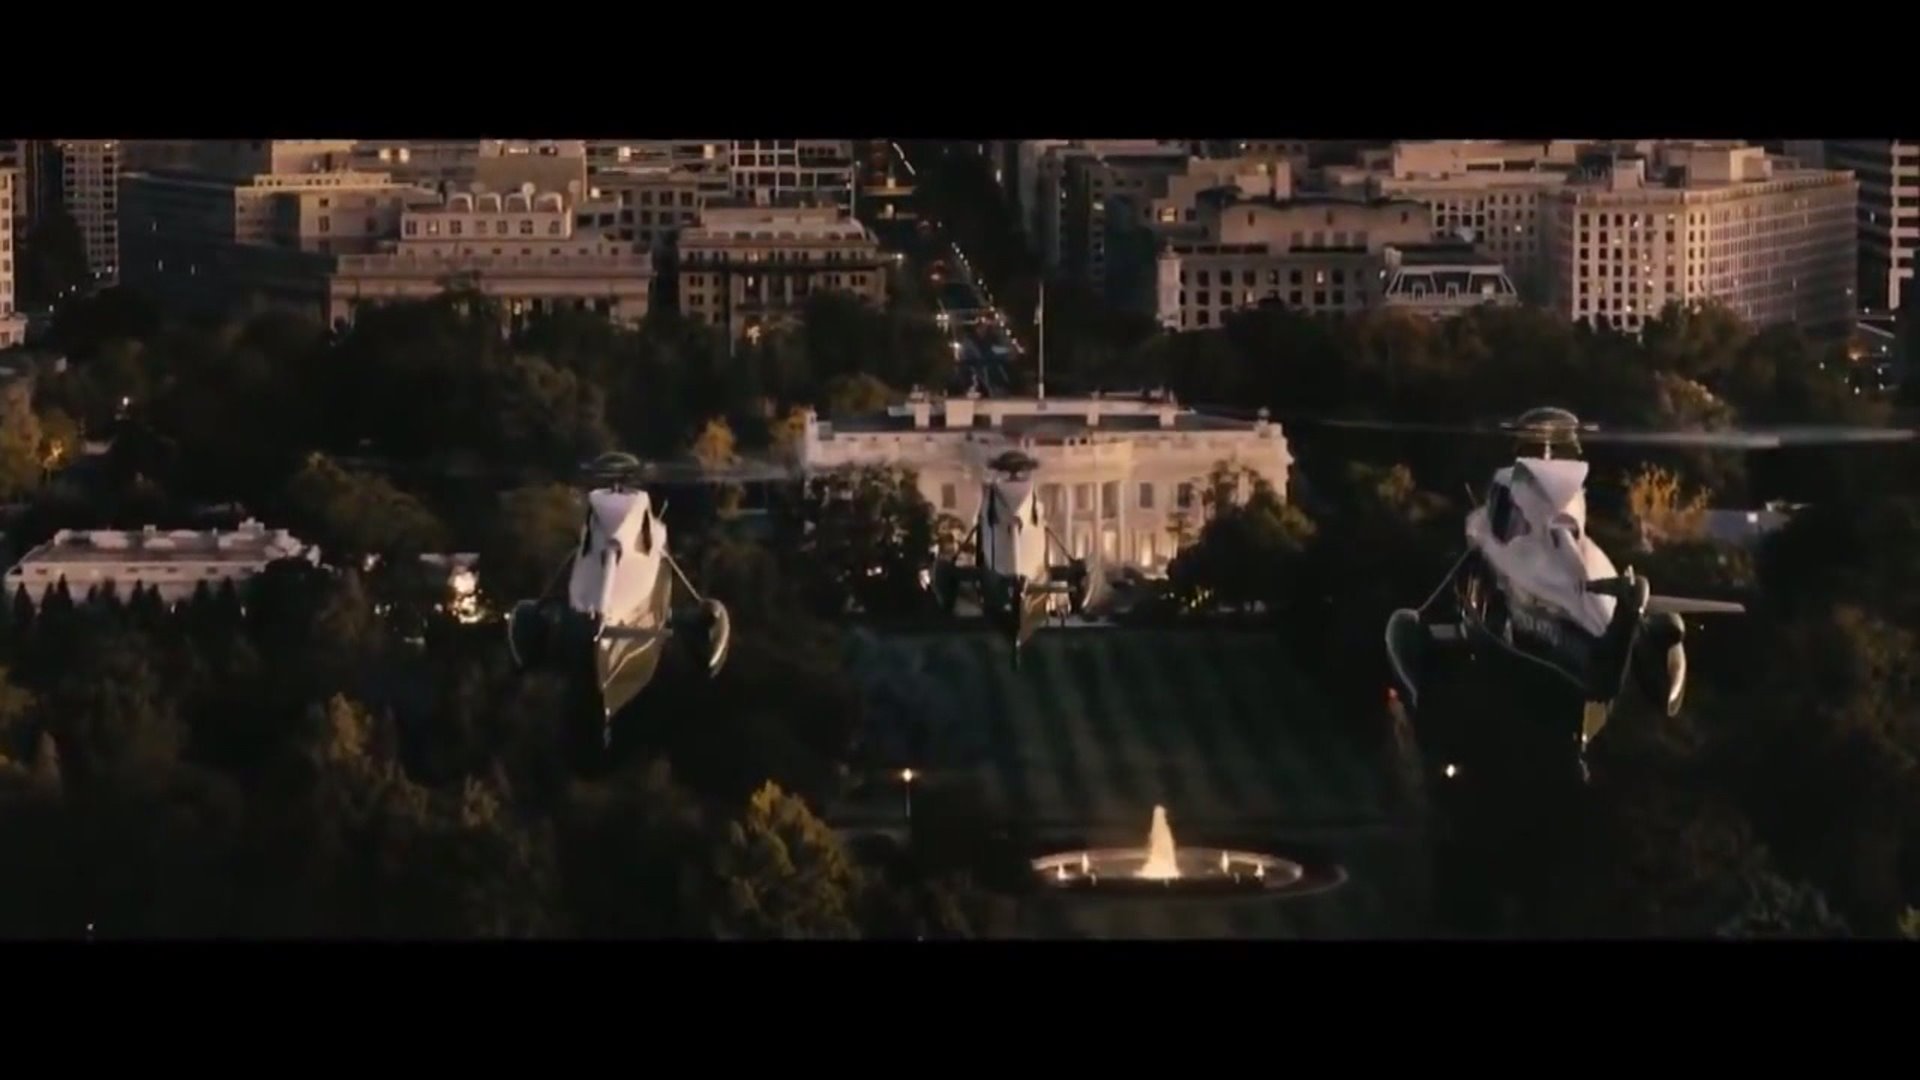 white house down characters